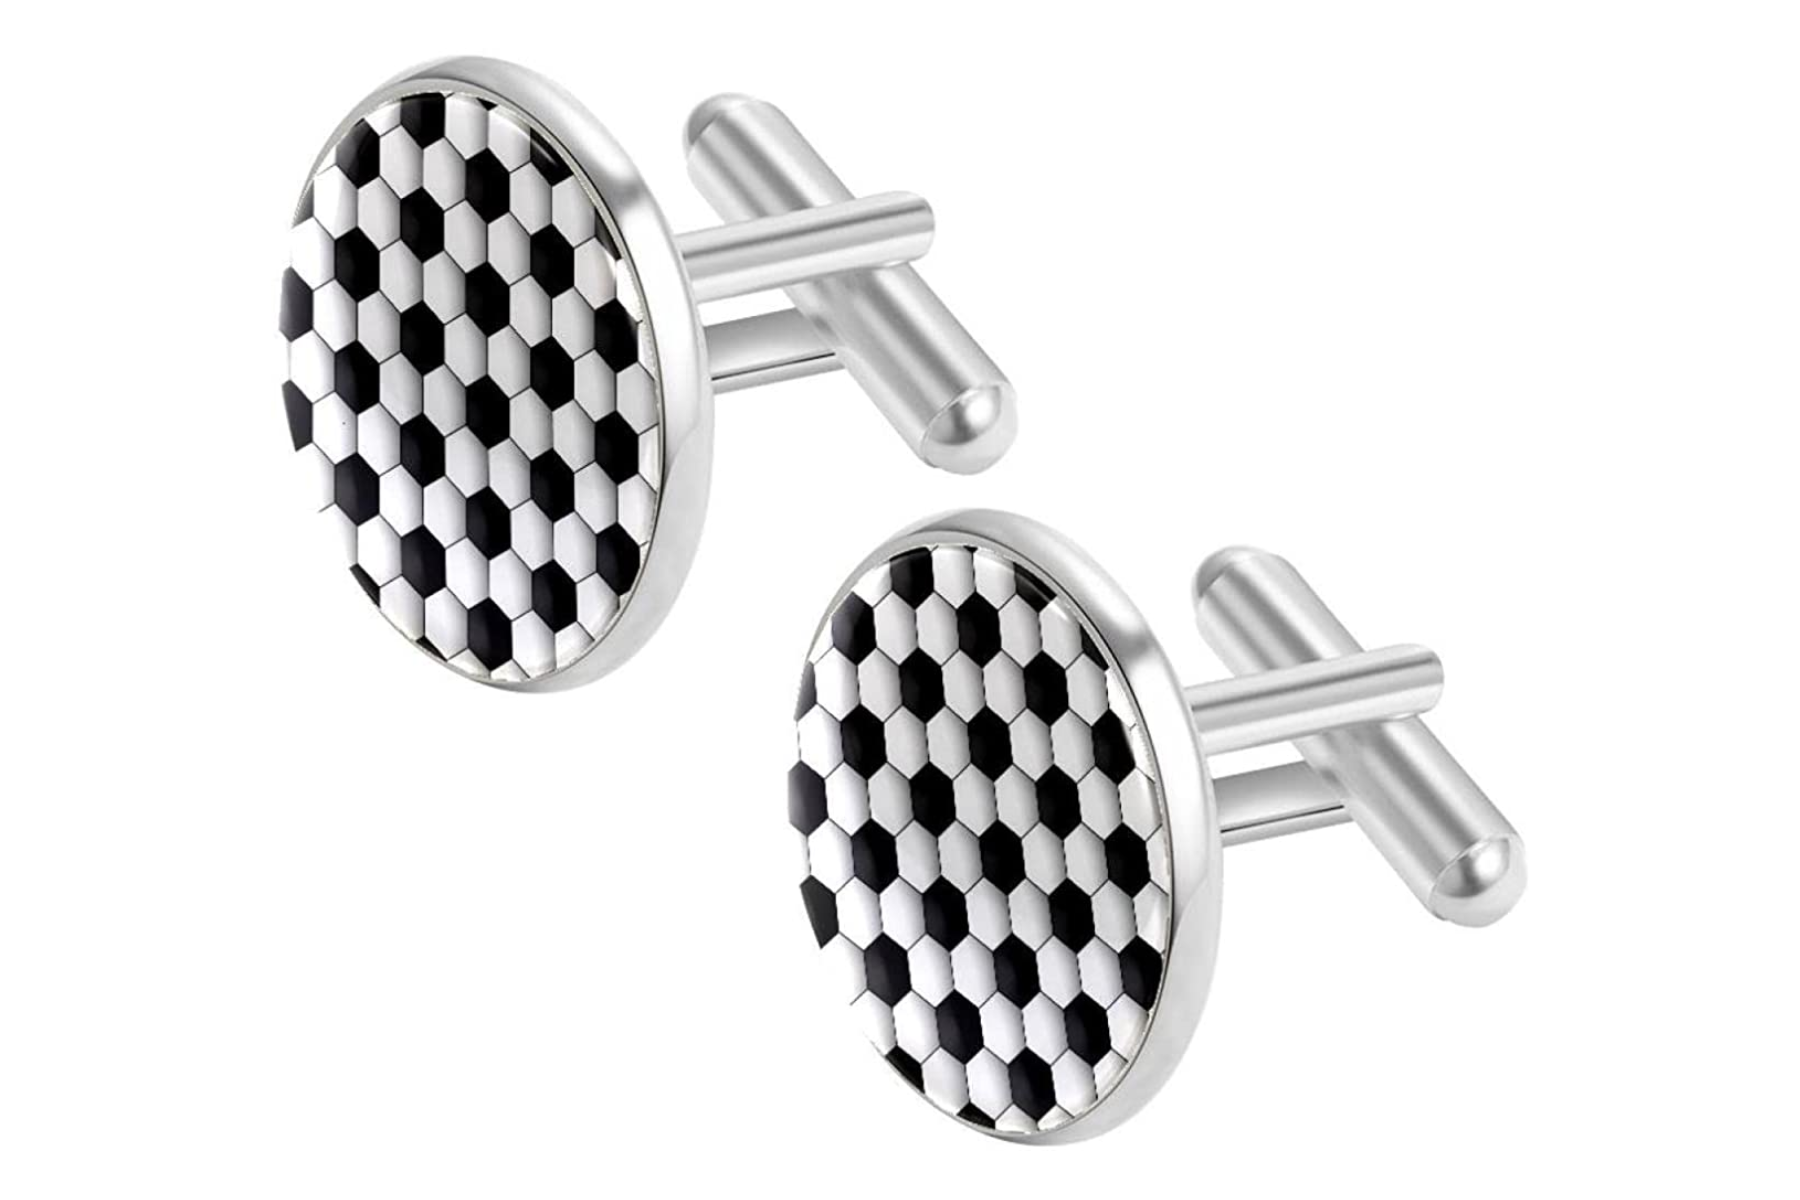 Sports-themed Cufflinks For Men - Get Game Day Ready